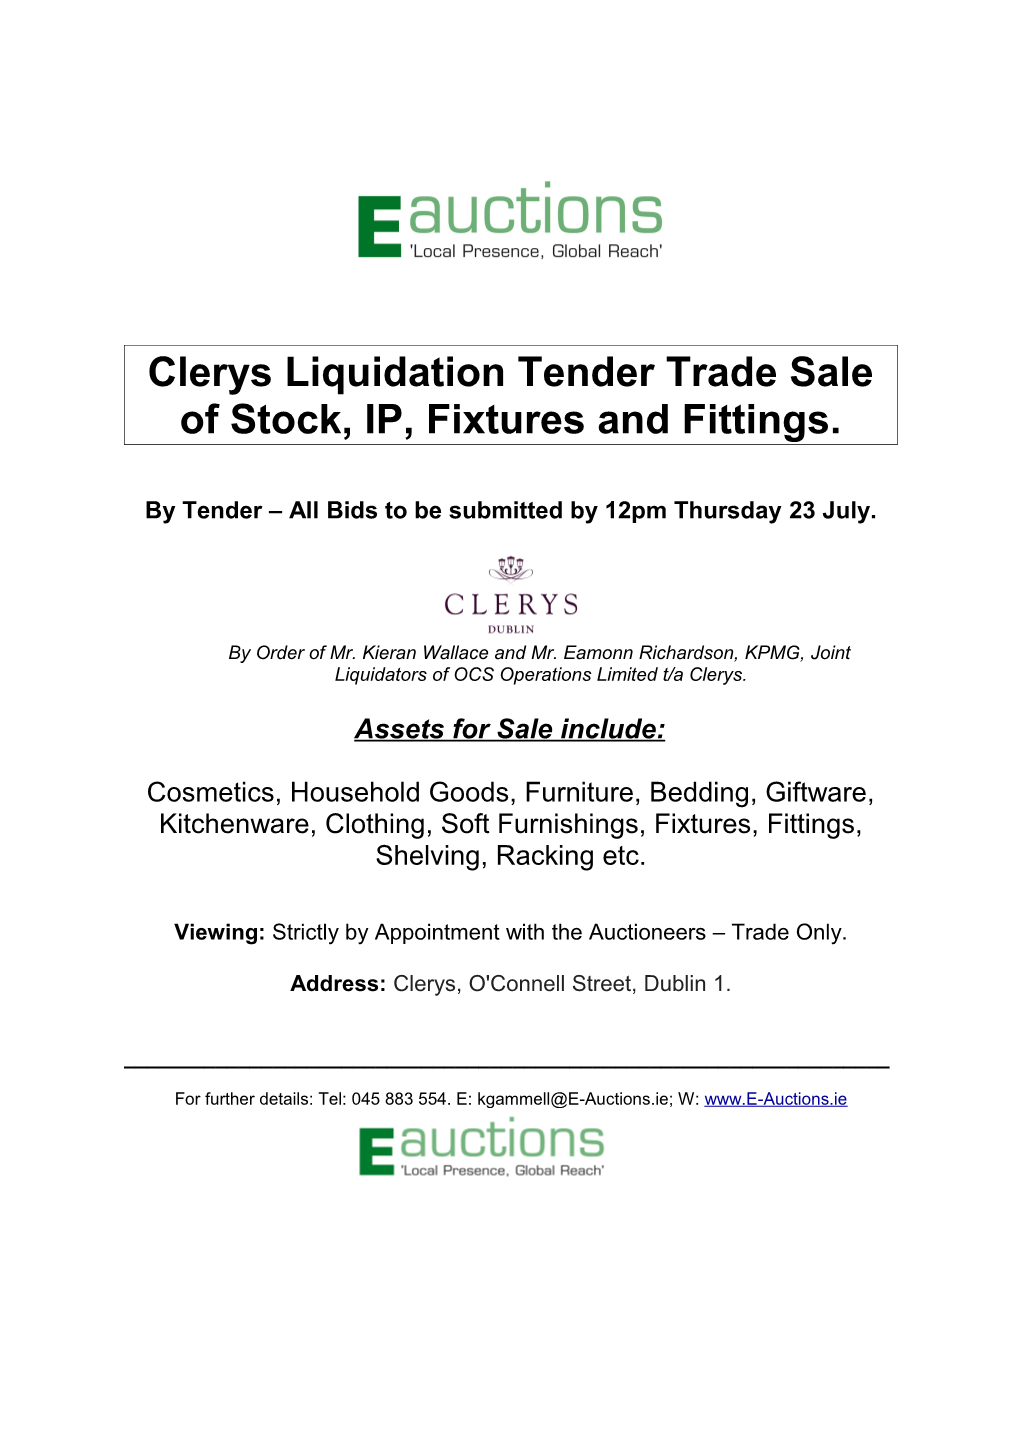 Clerys Liquidation Tender Trade Sale of Stock, IP, Fixtures and Fittings s1